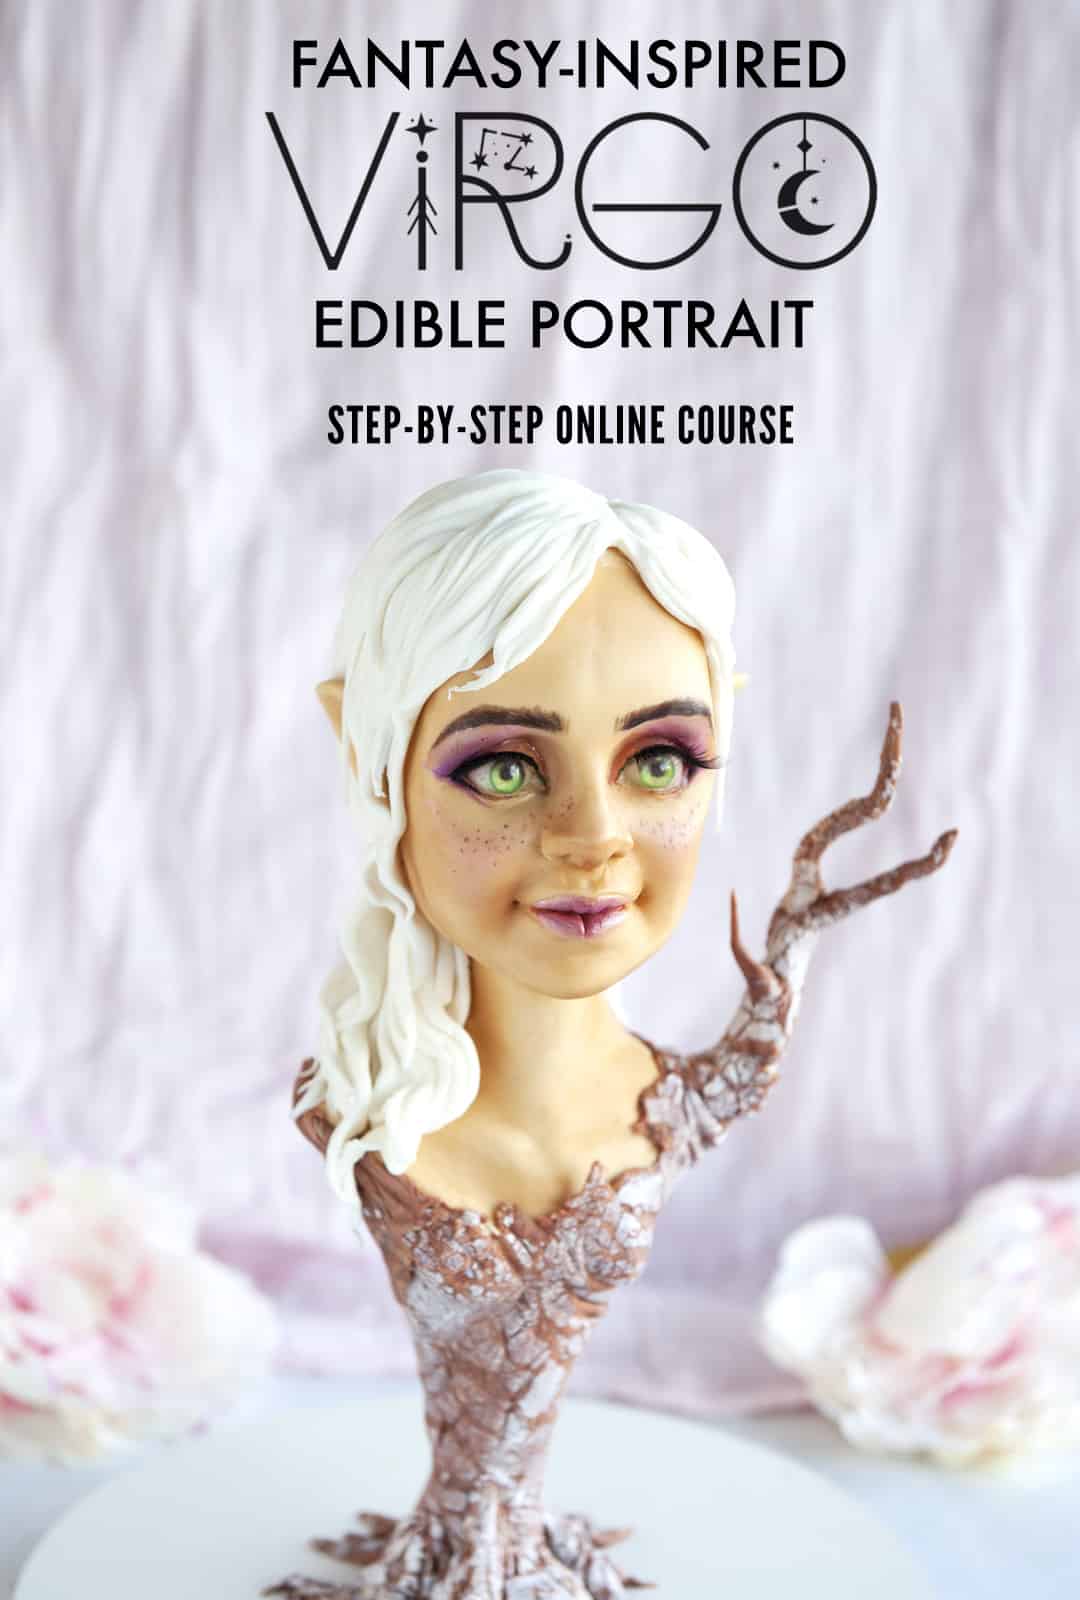 Cake sculpted to look like a portrait